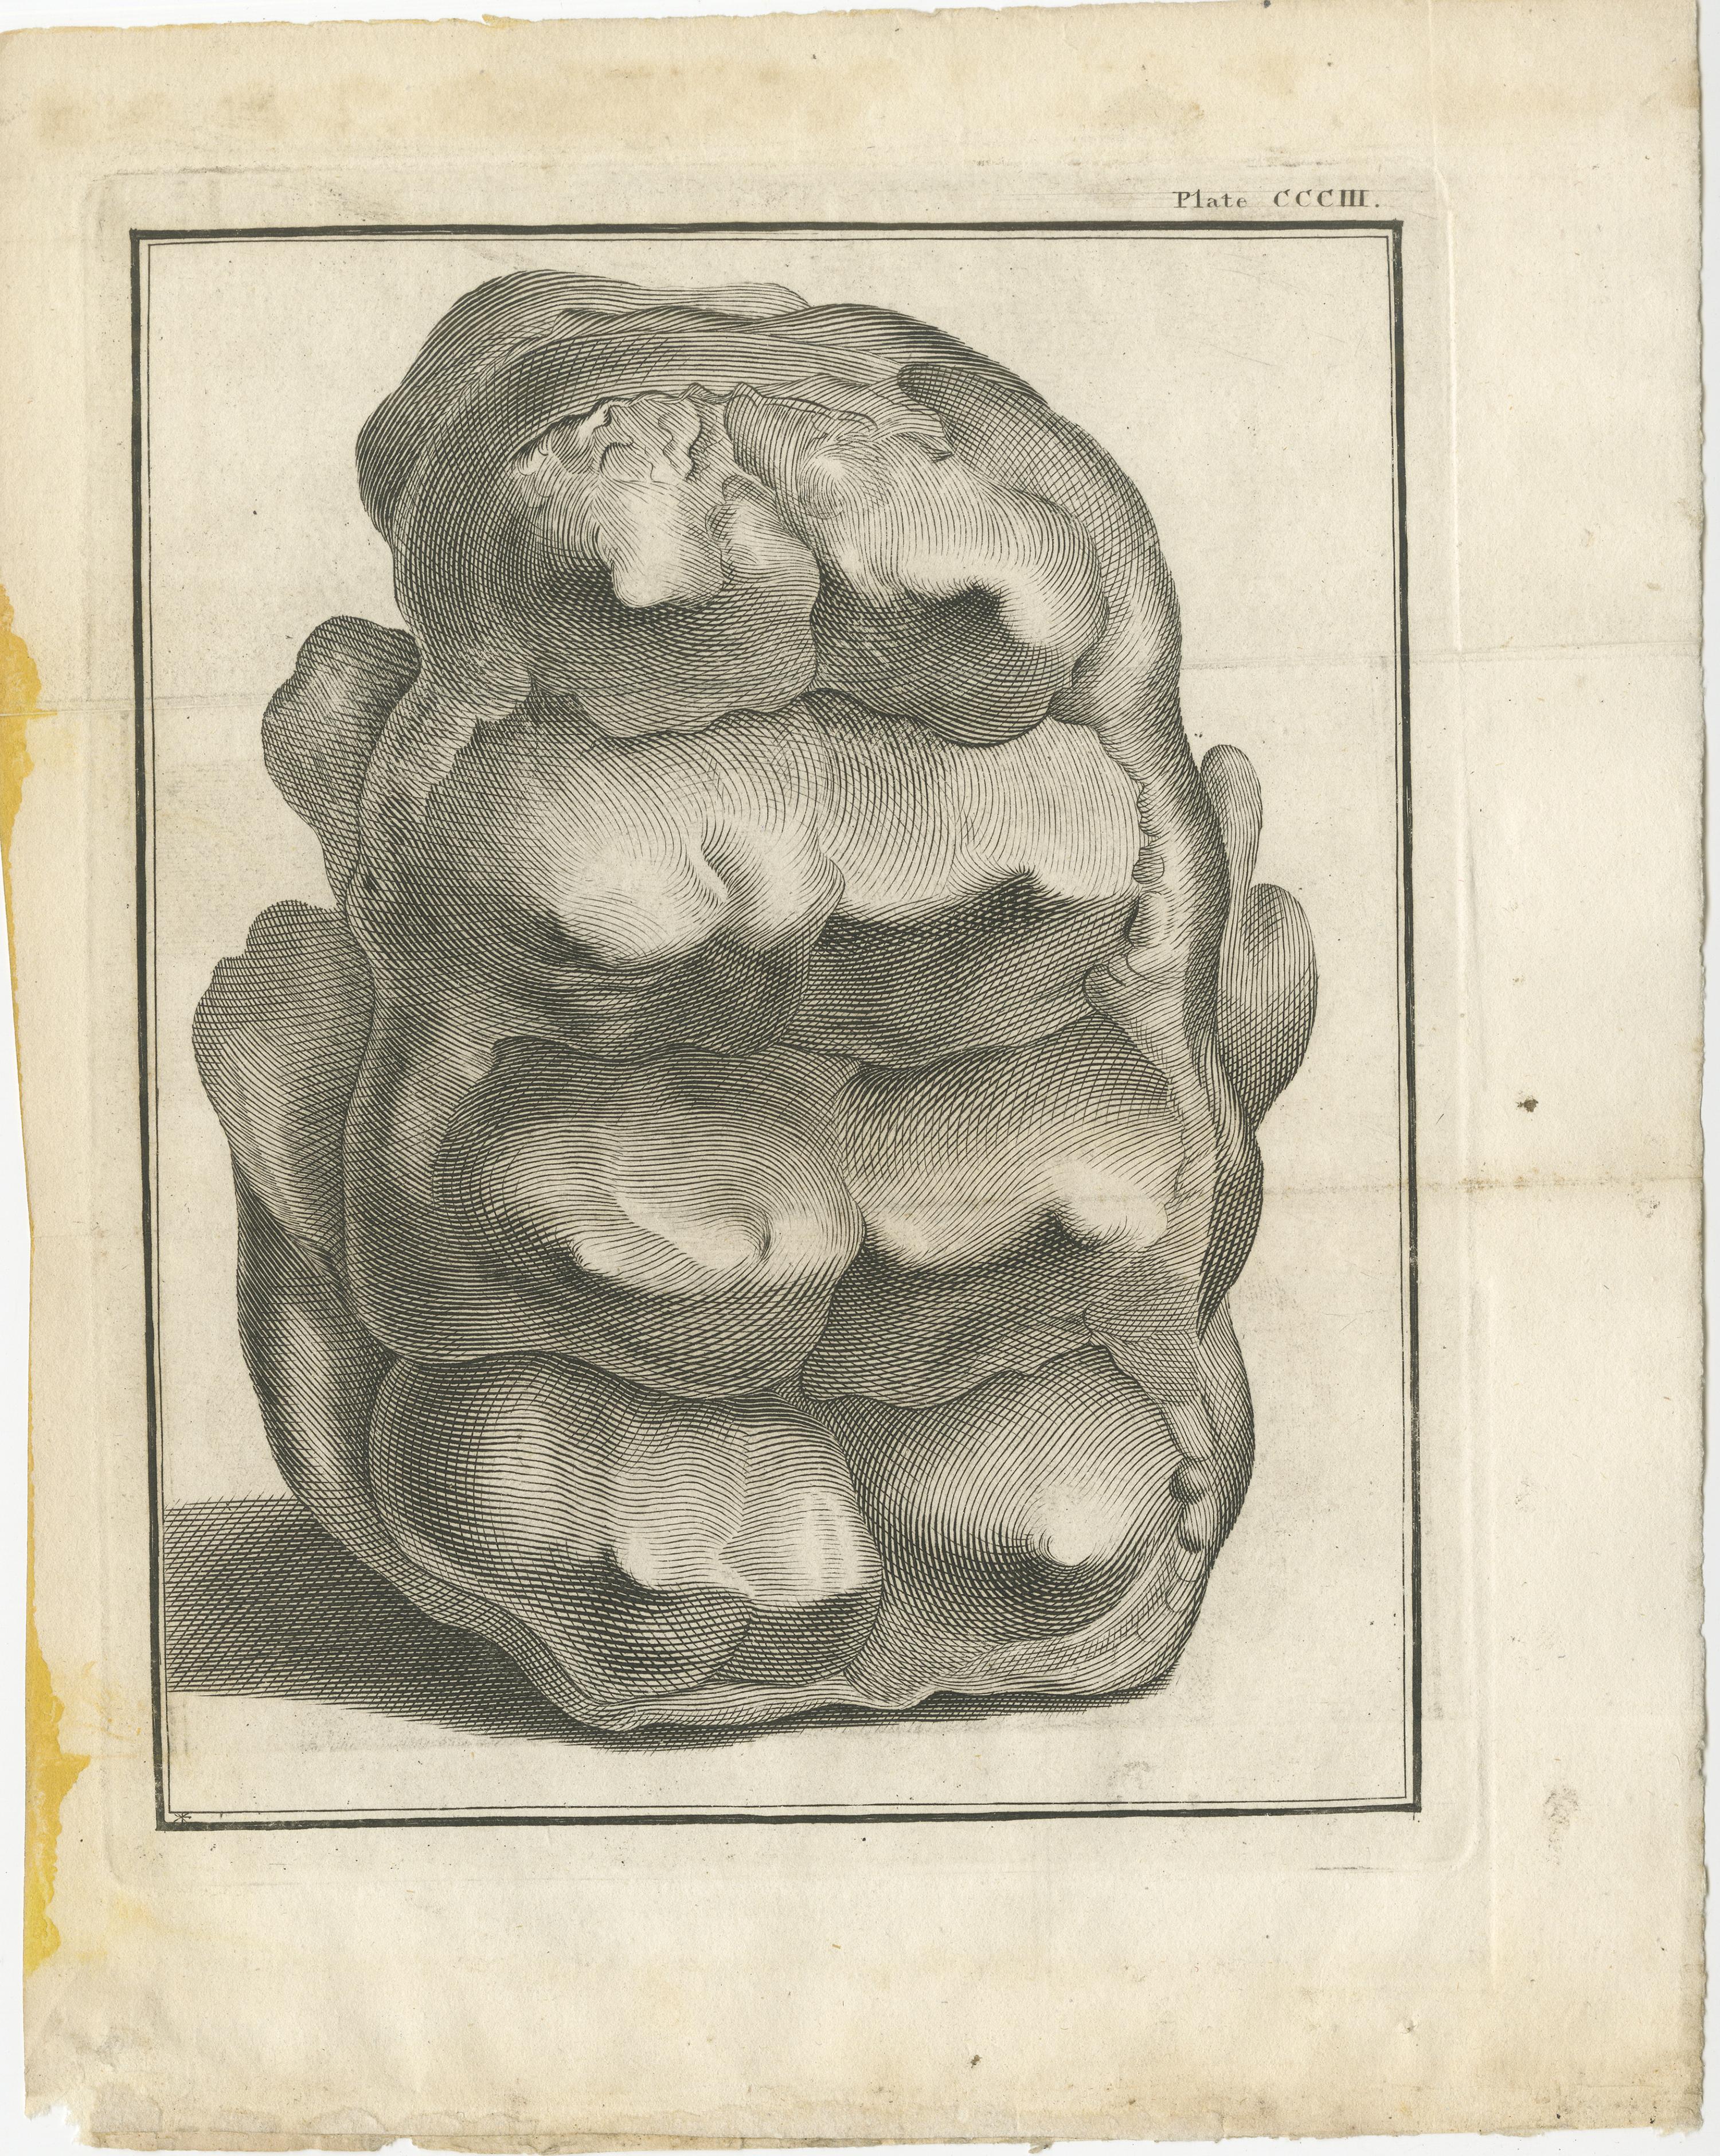 Set of three antique prints of fossils, most likely mammoth. Source unknown, to be determined. Published circa 1810.